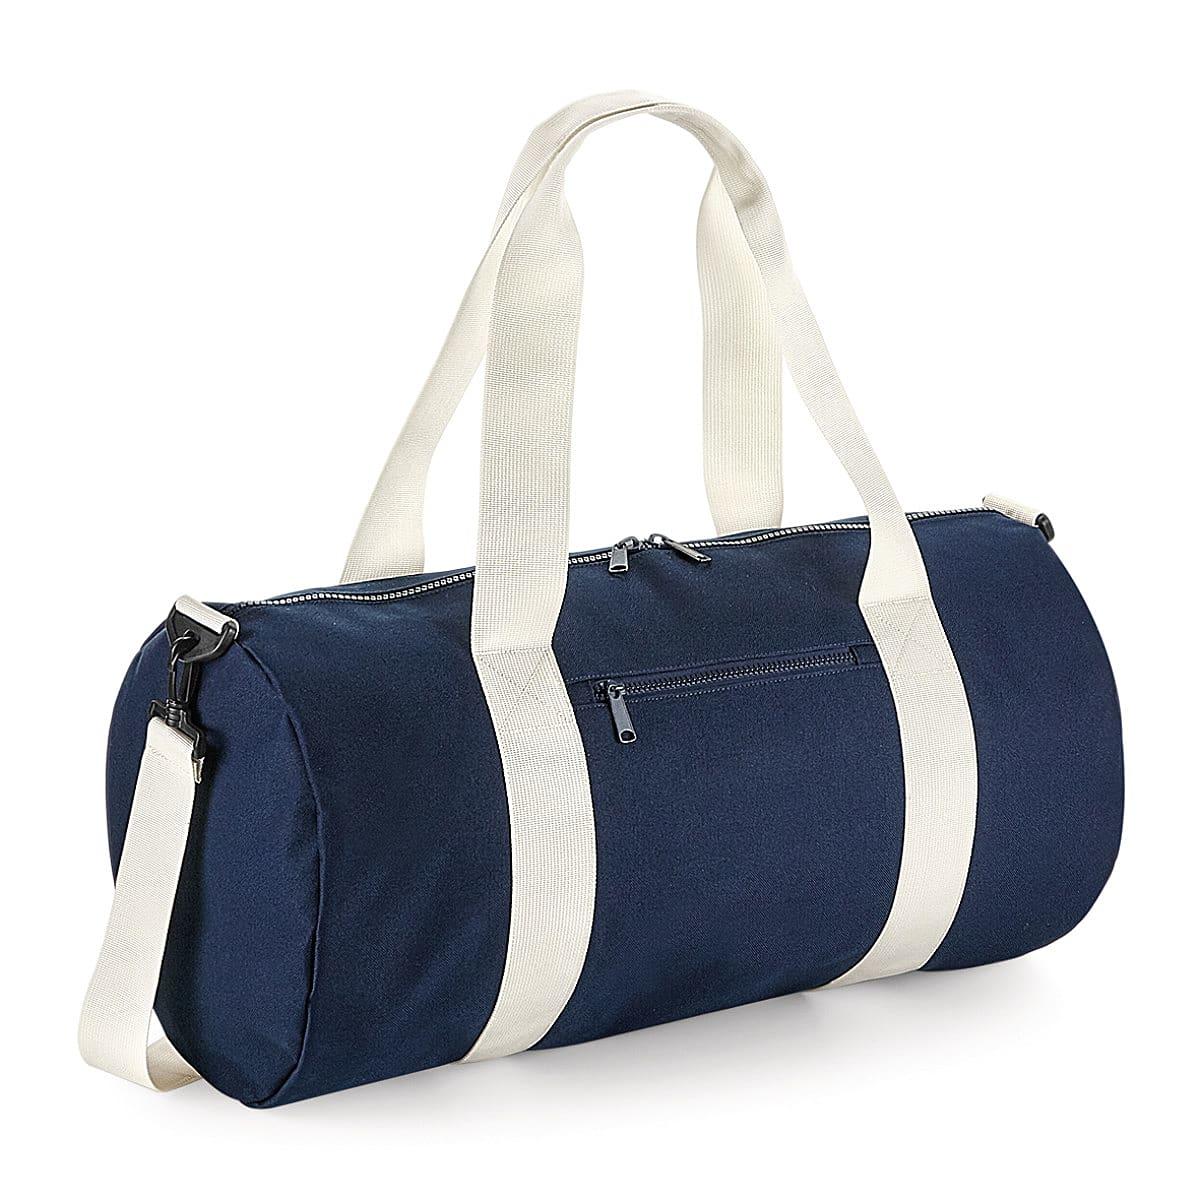 Bagbase Original Barrel Bag XL in French Navy / Off-White (Product Code: BG140L)